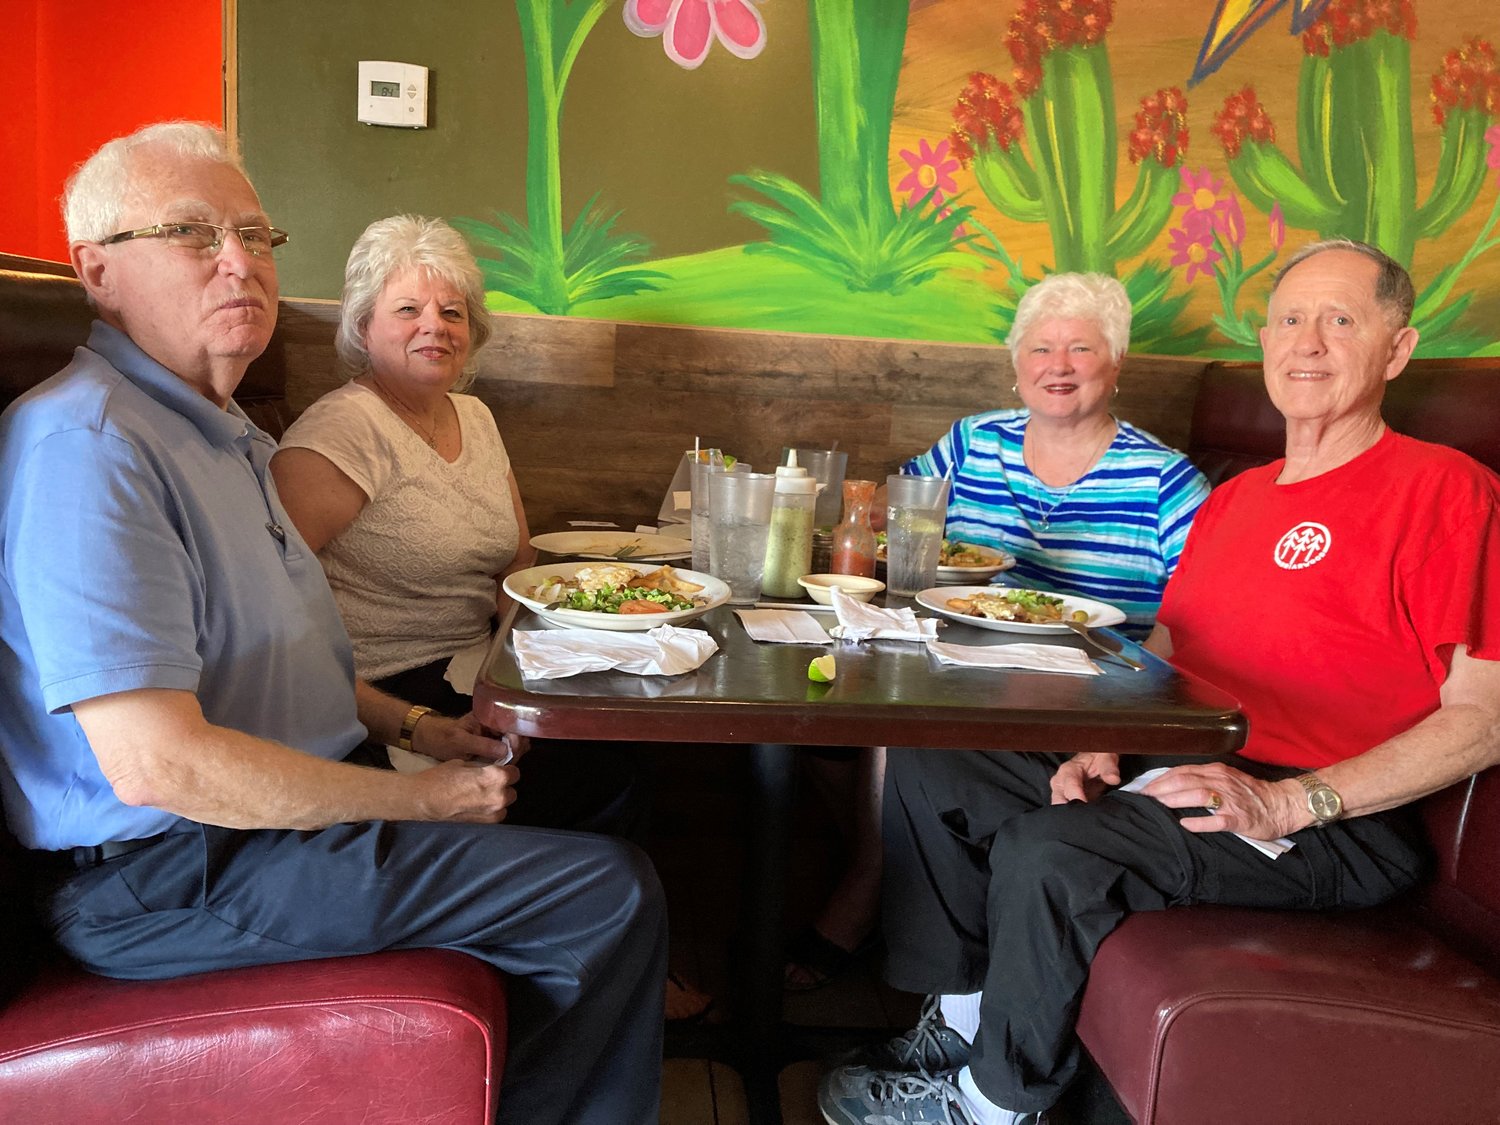 Some 25 retired IMB missionaries to Uruguay, including Dave and Diana Daniels, left, and Joe and Jeanie Benfield, gathered in Athens for a reunion. (Christian Index/Roger Alford)